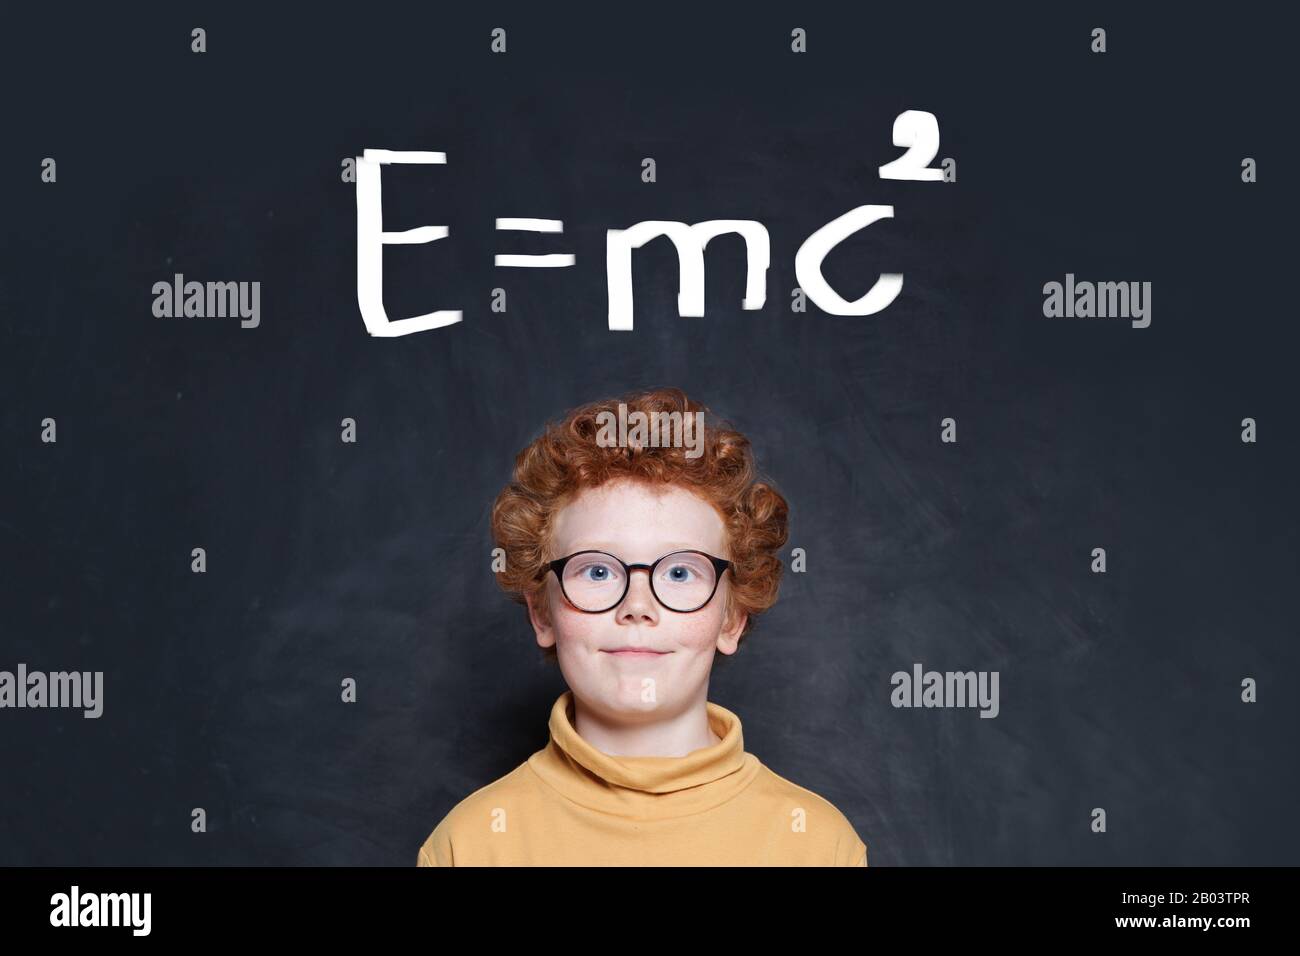 Curious kid boy wearing glasses on background with science formula Stock Photo